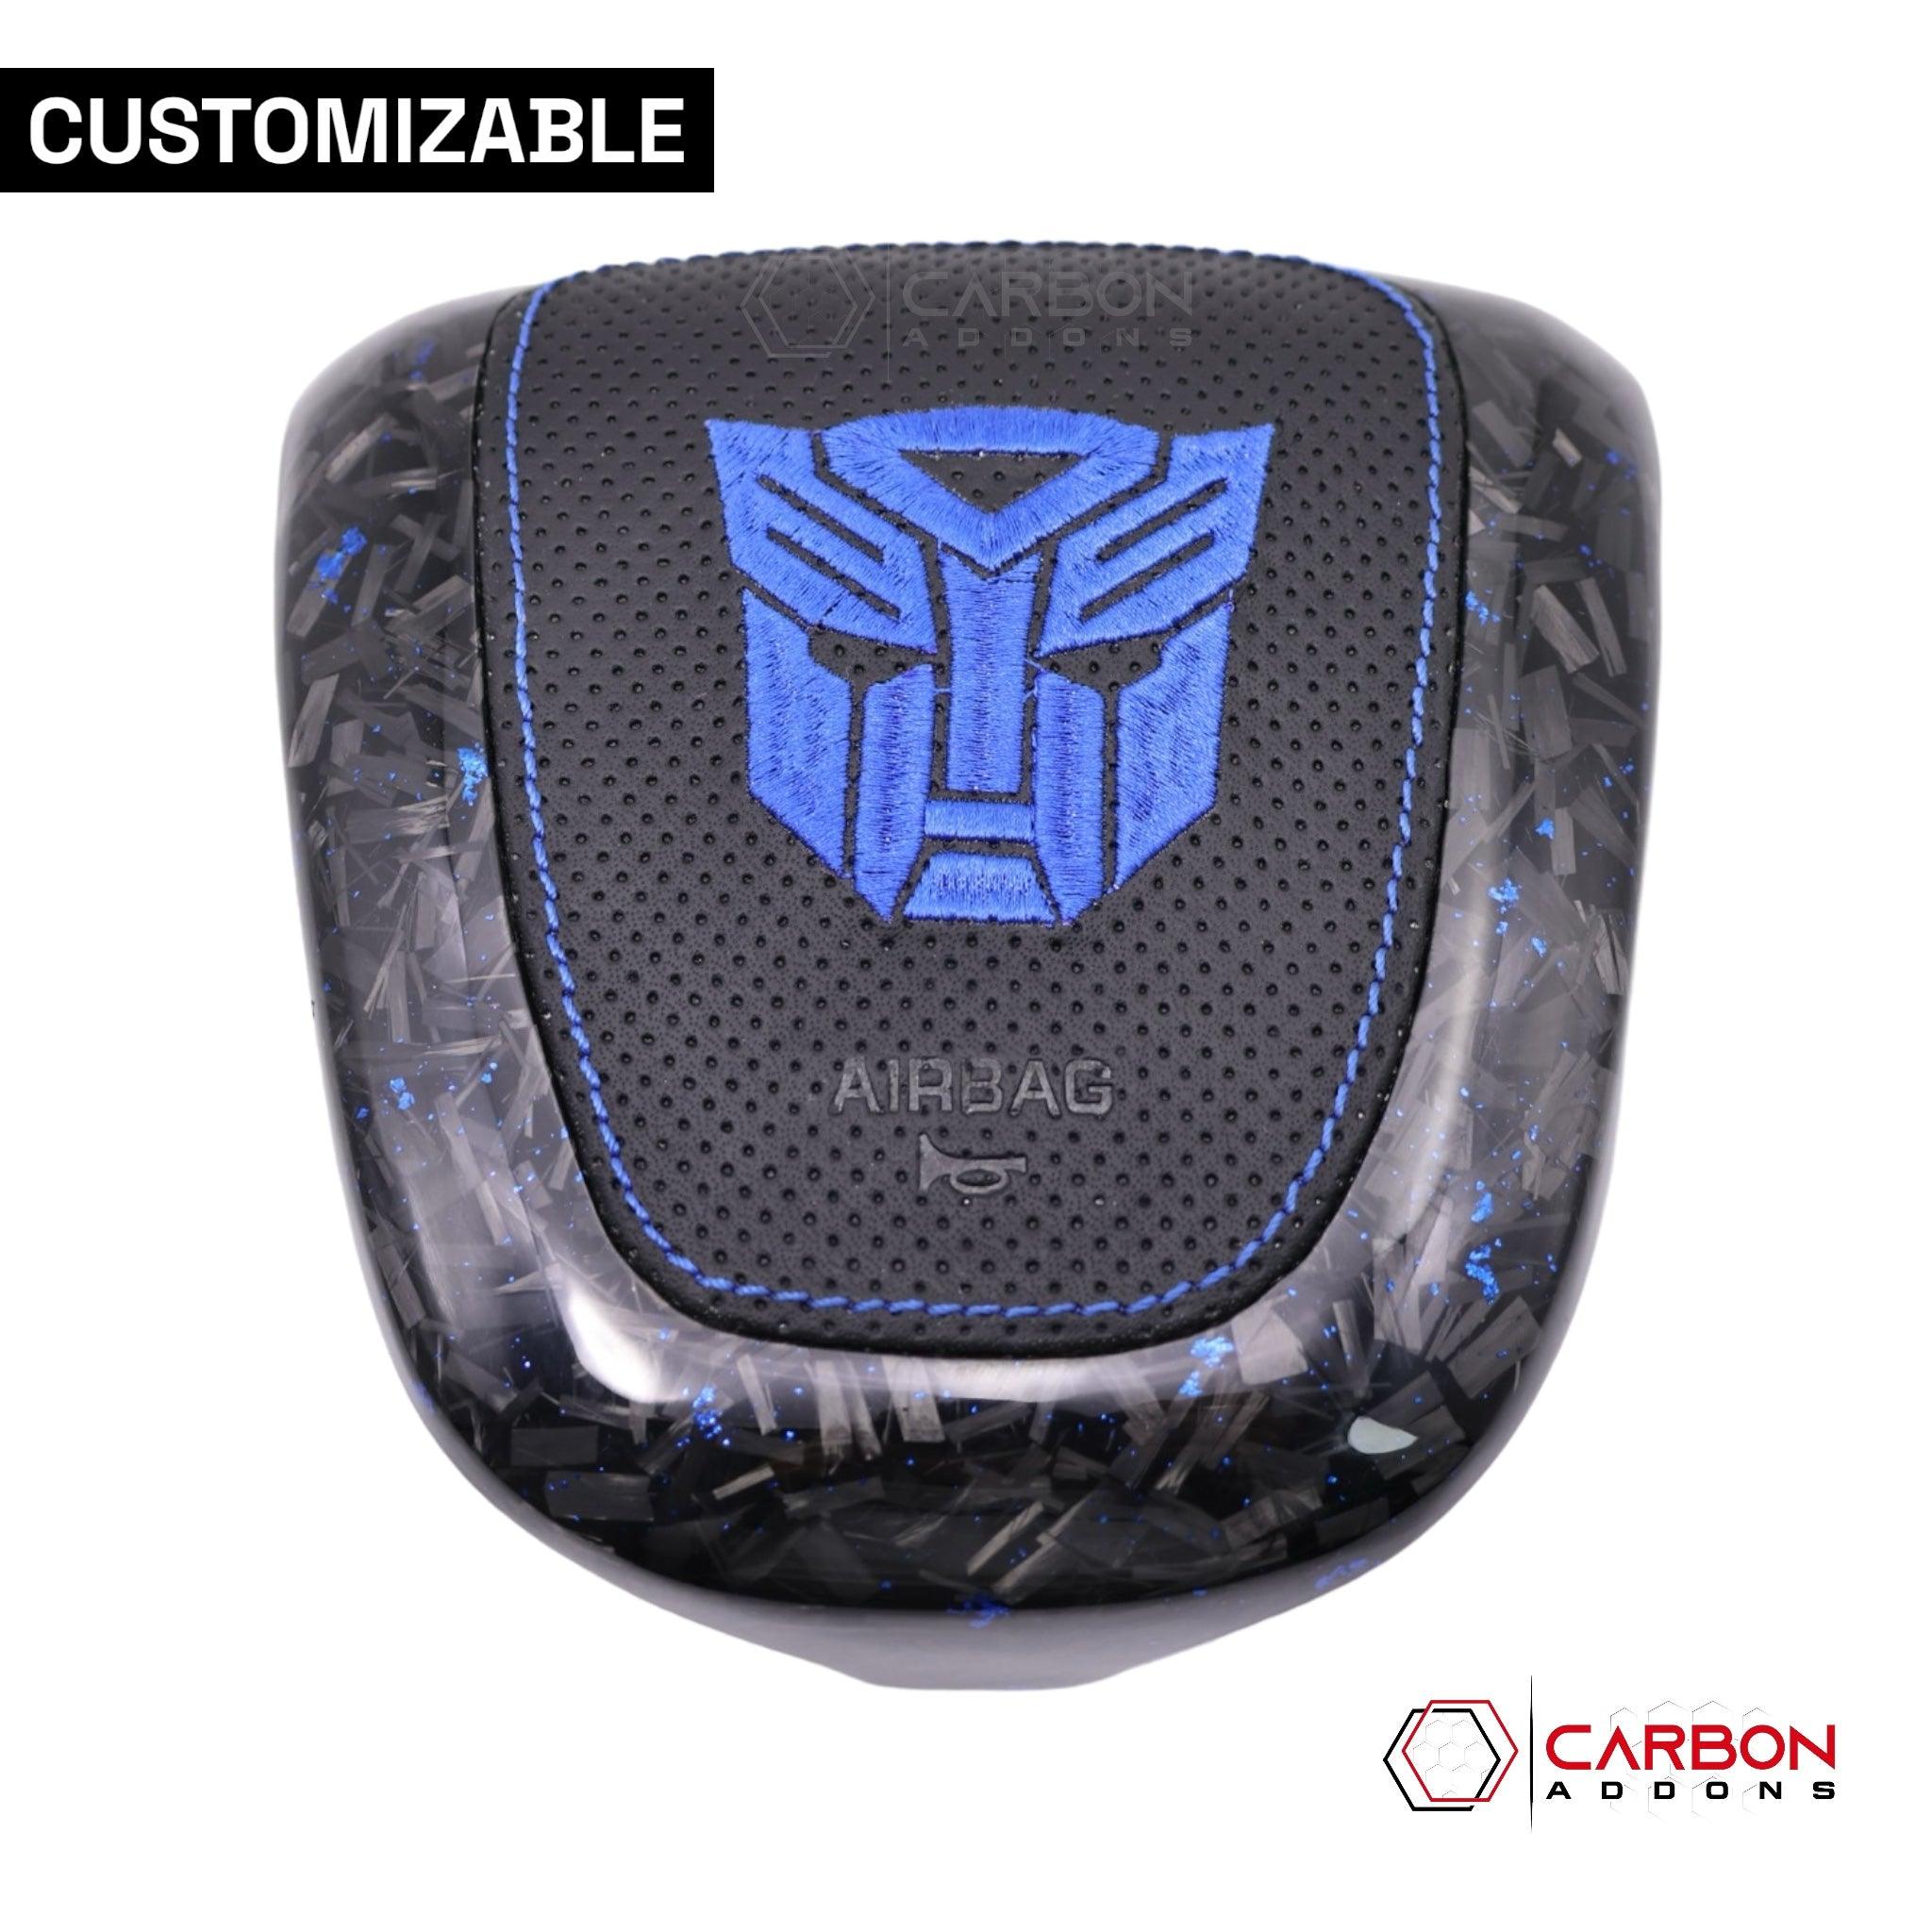 2012-2015 Chevy Camaro Custom Airbag Housing Cover - carbonaddons Carbon Fiber Parts, Accessories, Upgrades, Mods